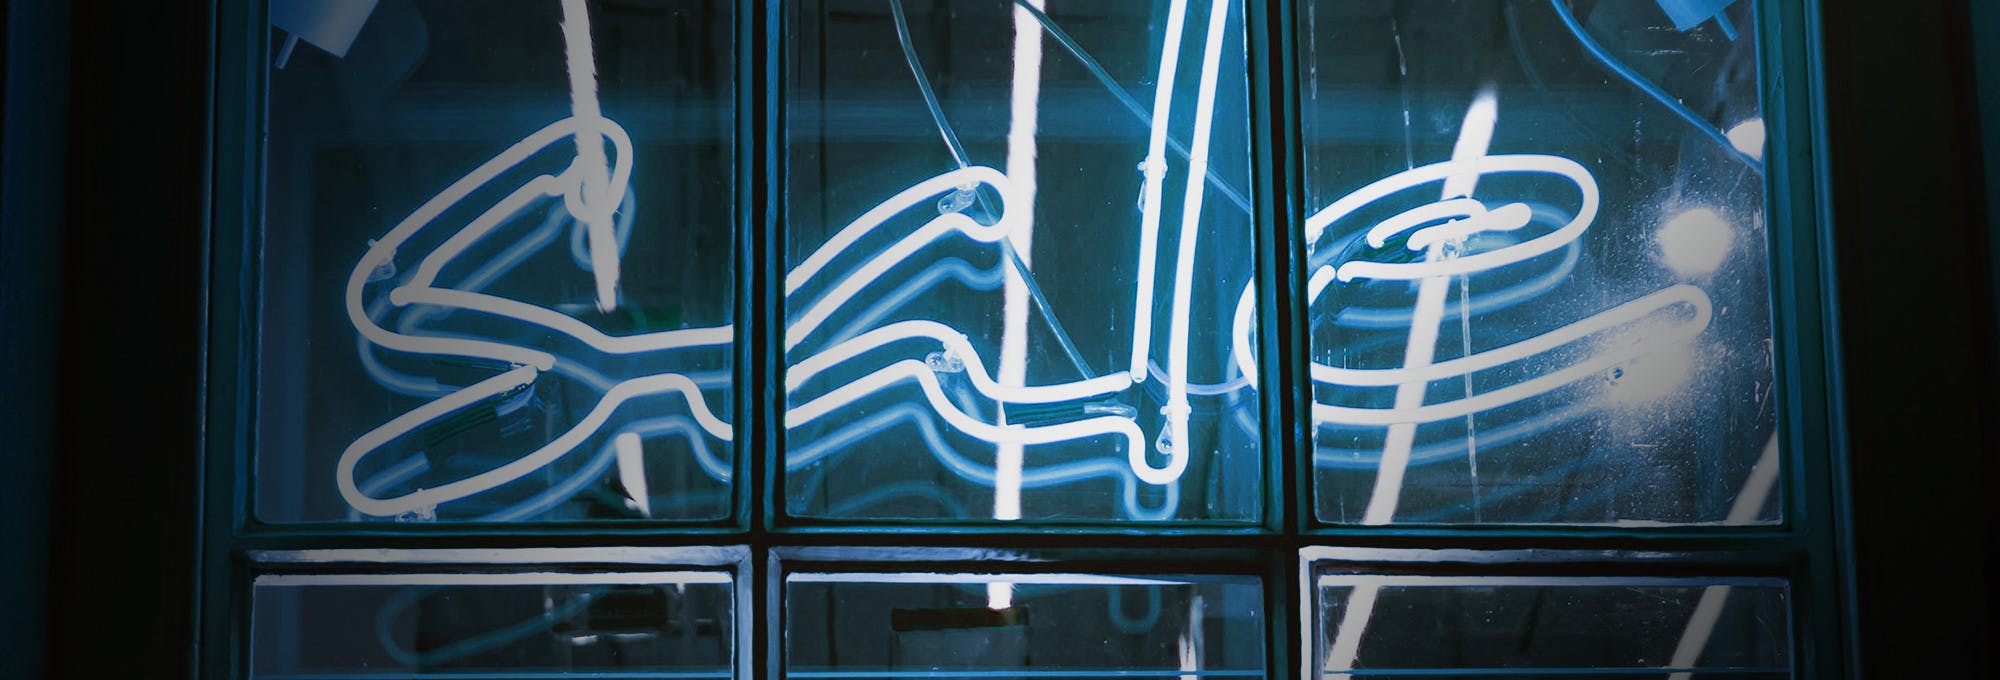 A blue and white neon "Sale" sign in a window.